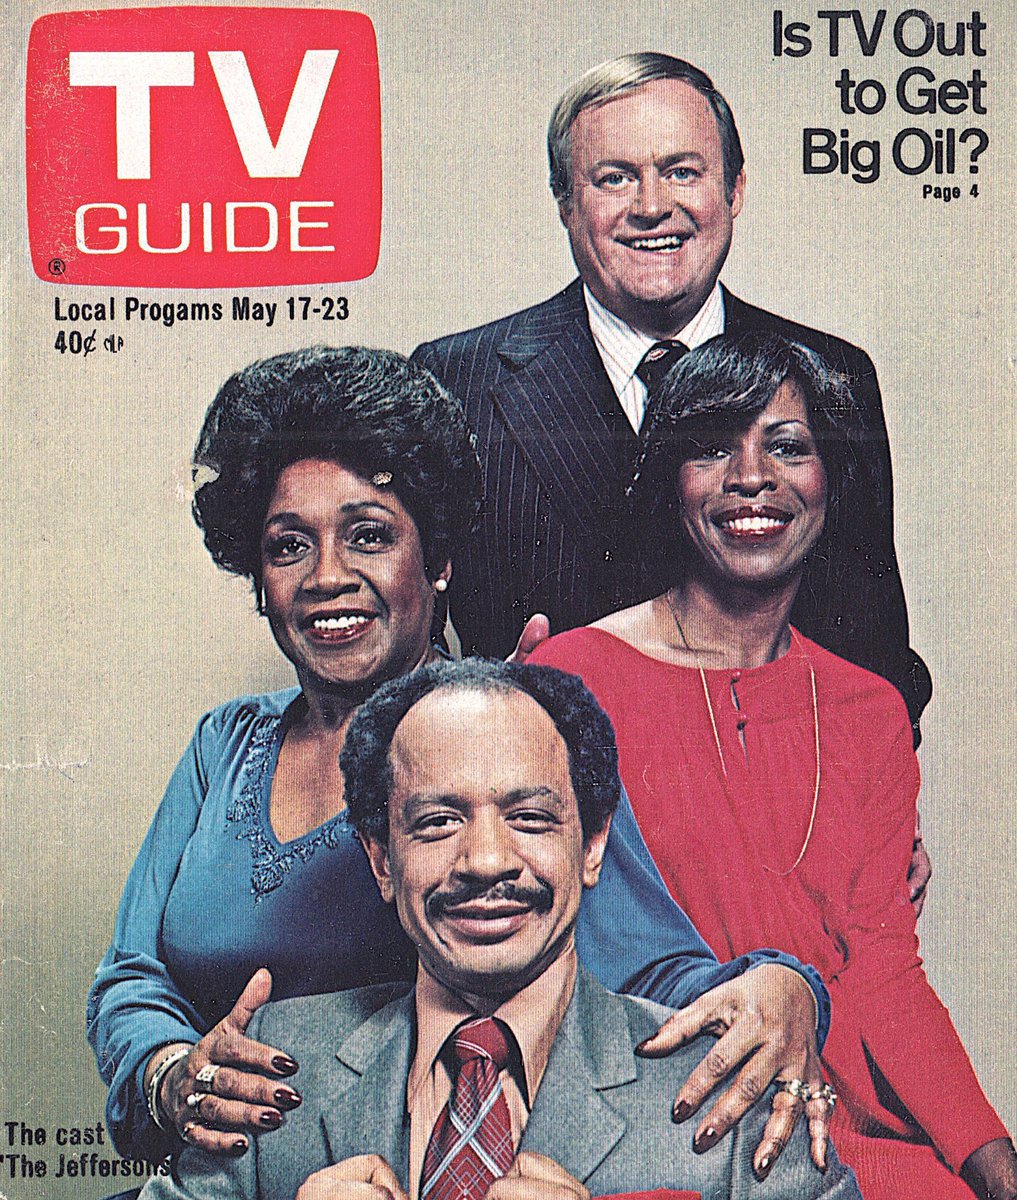 TV Guide Cover, May 17-23, 1980: Isabel Sanford, Sherman Hemsley, Roxie Roker and Franklin Cover of ‘The Jeffersons’